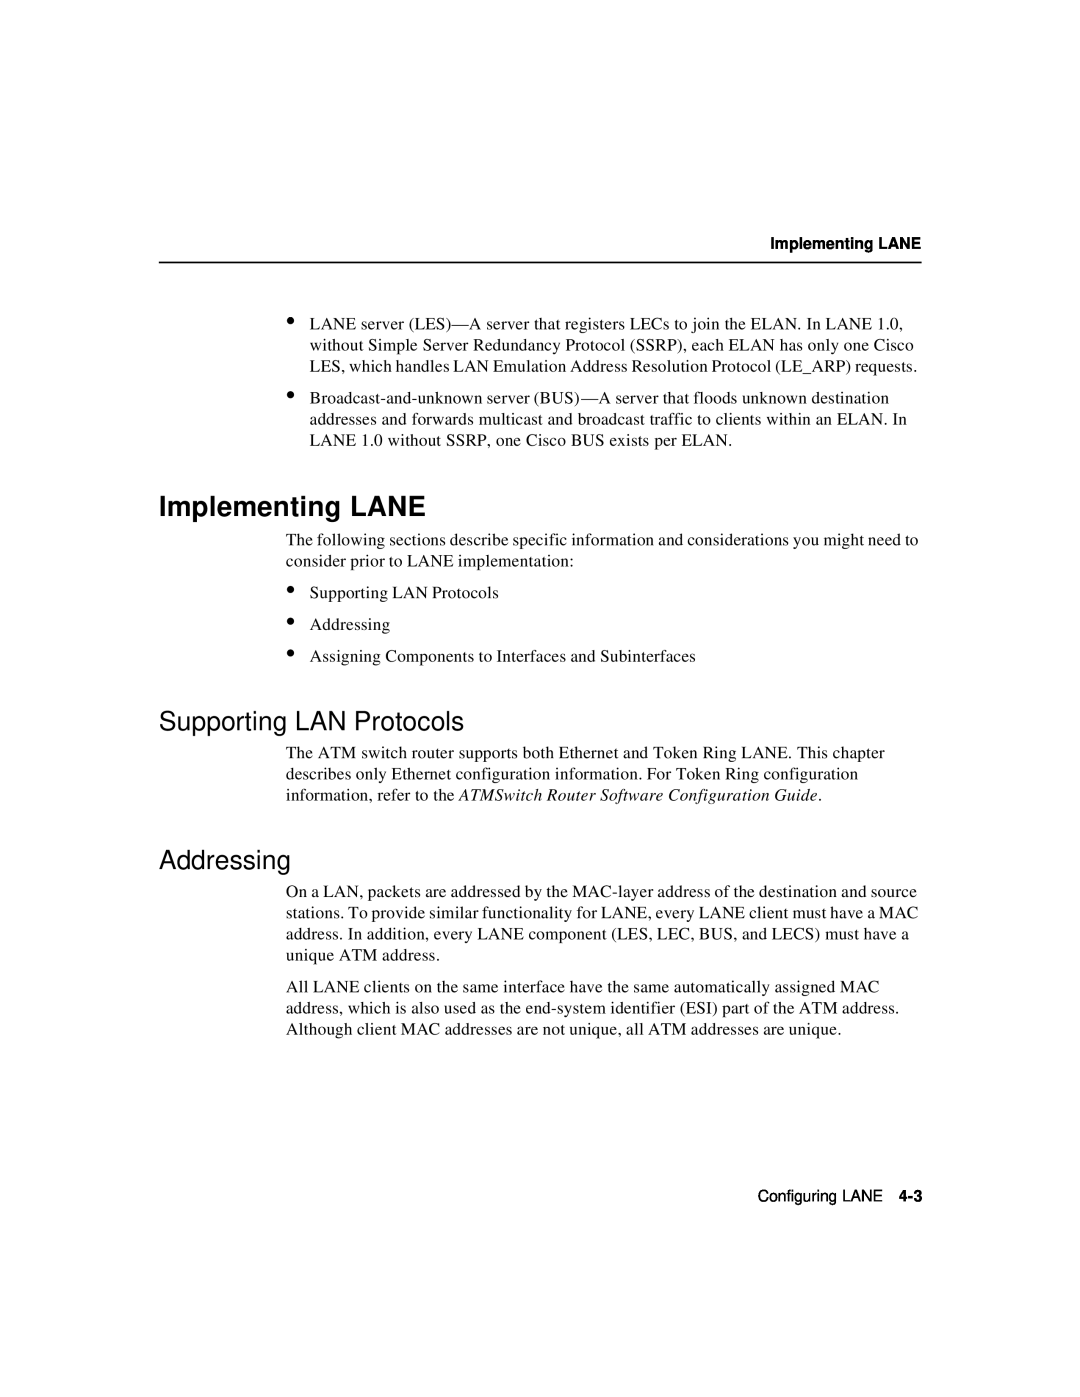 Cisco Systems 78-6897-01 manual Implementing LANE, Supporting LAN Protocols, Addressing 